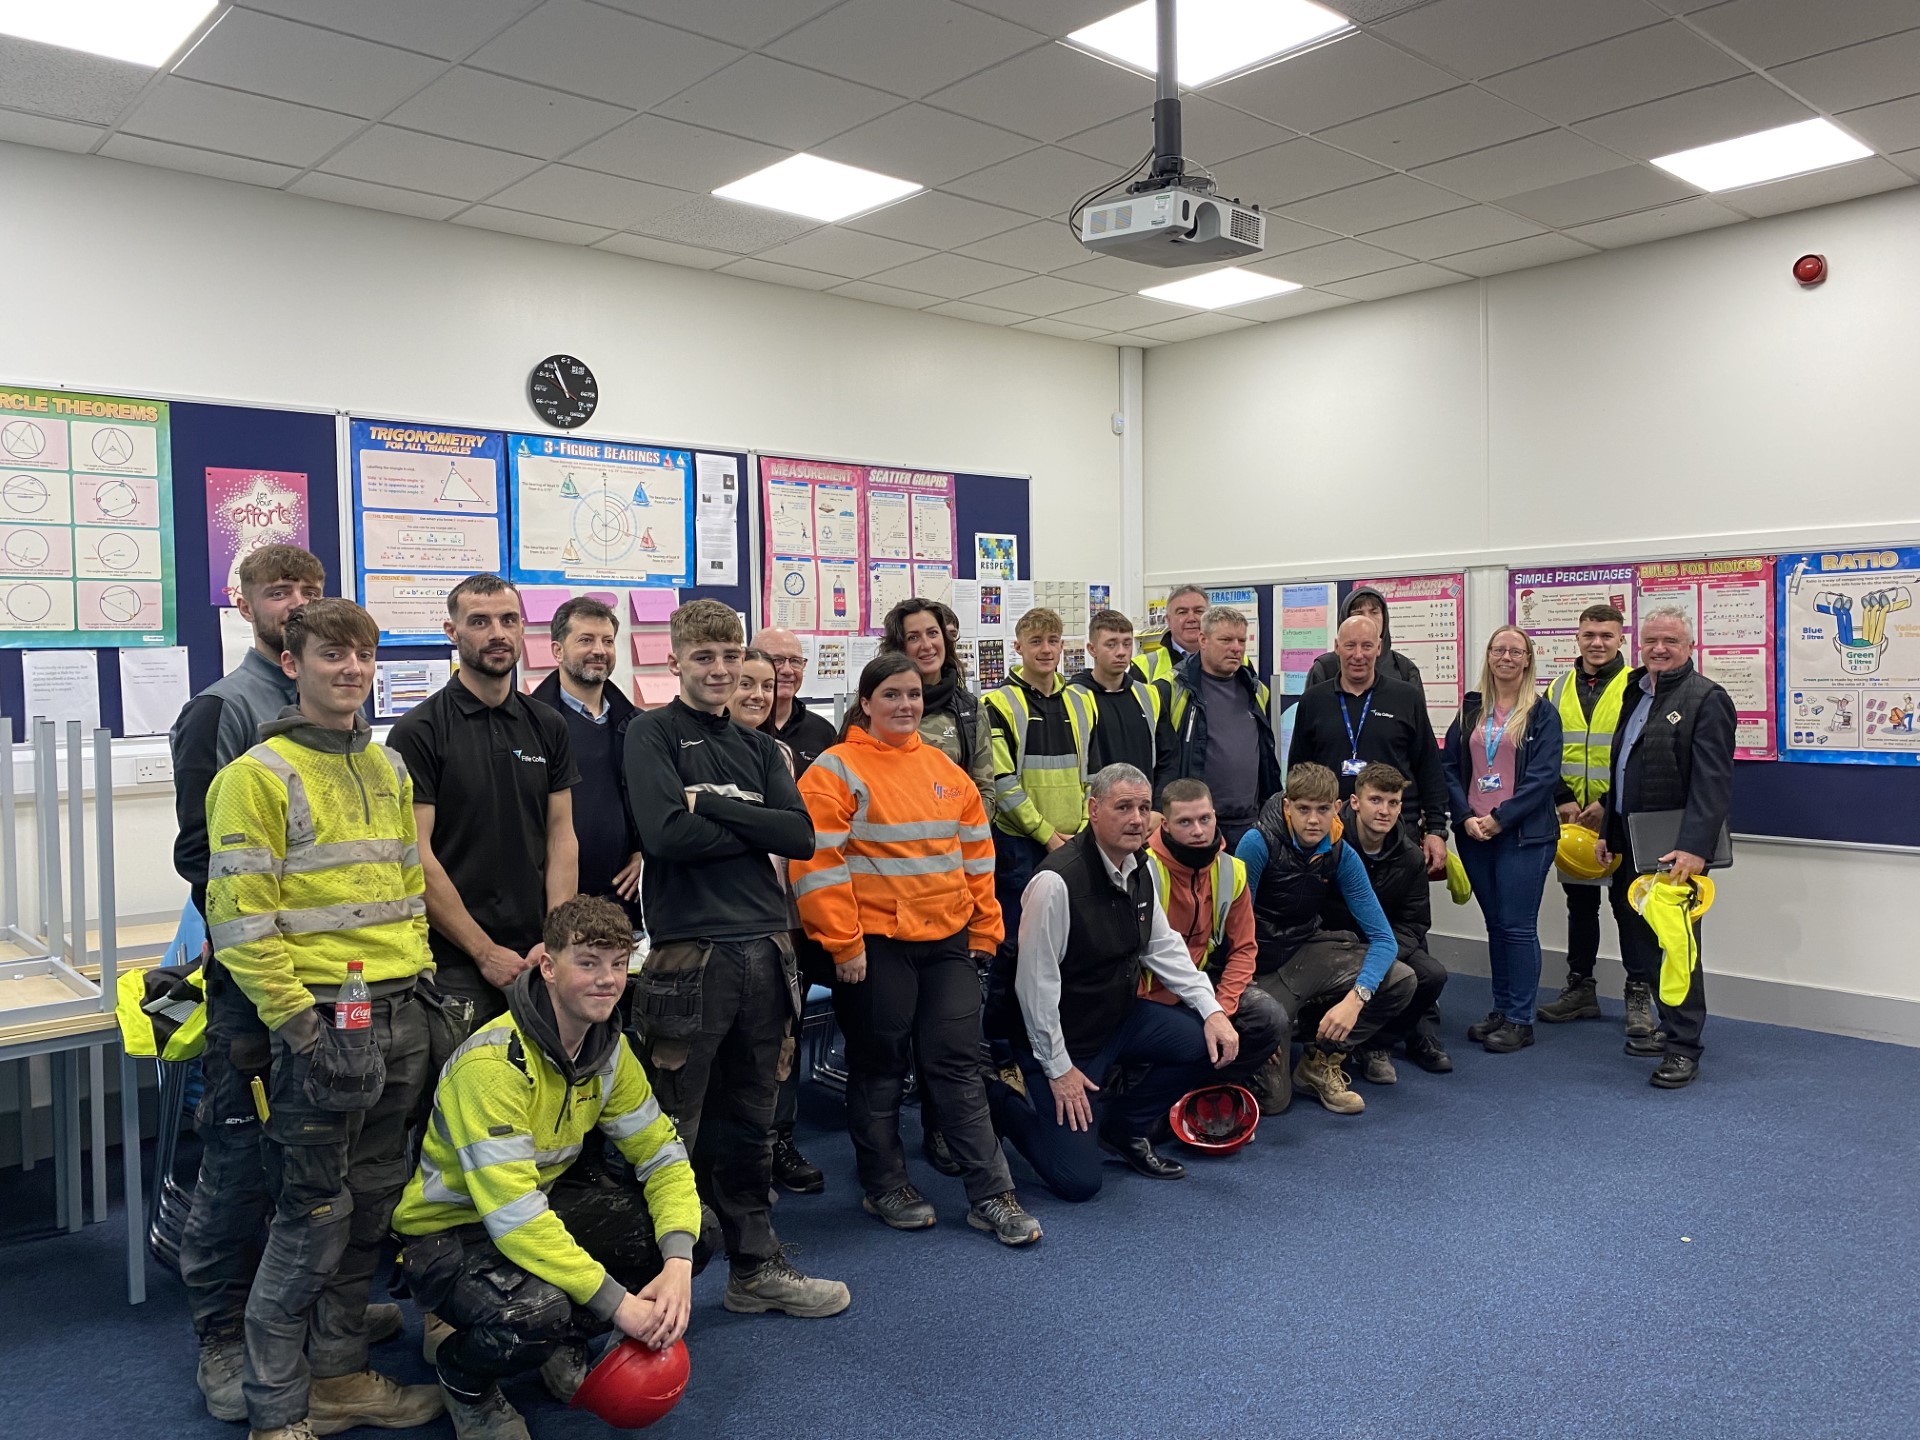 Roofing students given unique insight into Kirkcaldy Campus upgrade works